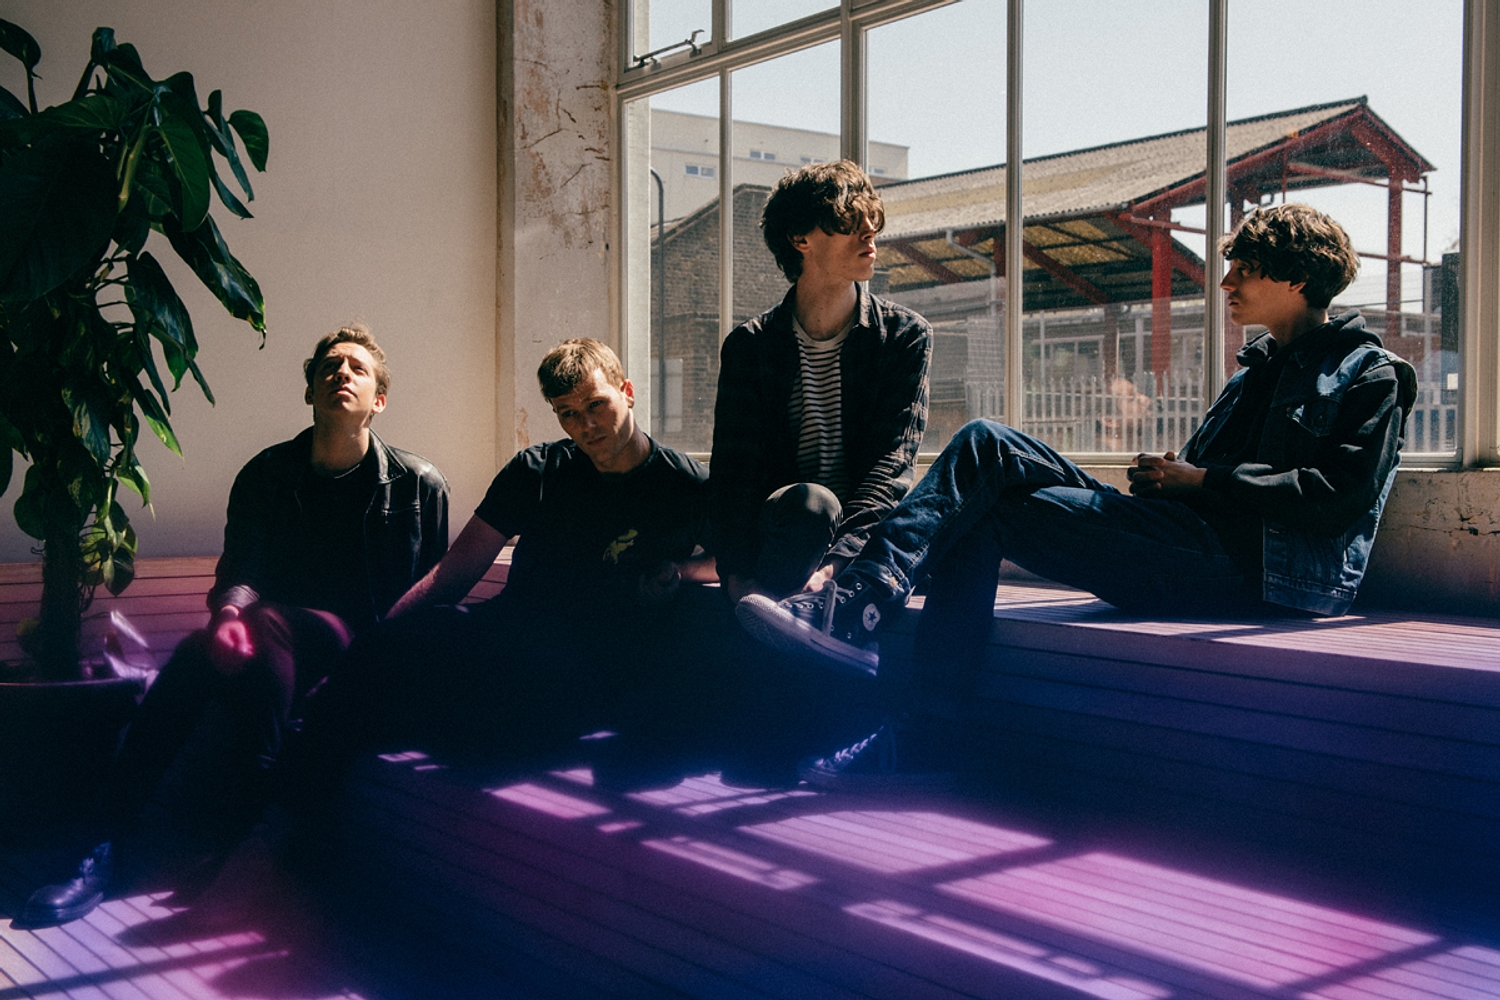 Dreaming Big - Gengahr: "If we feel like we can do it, we’ll do it ourselves"